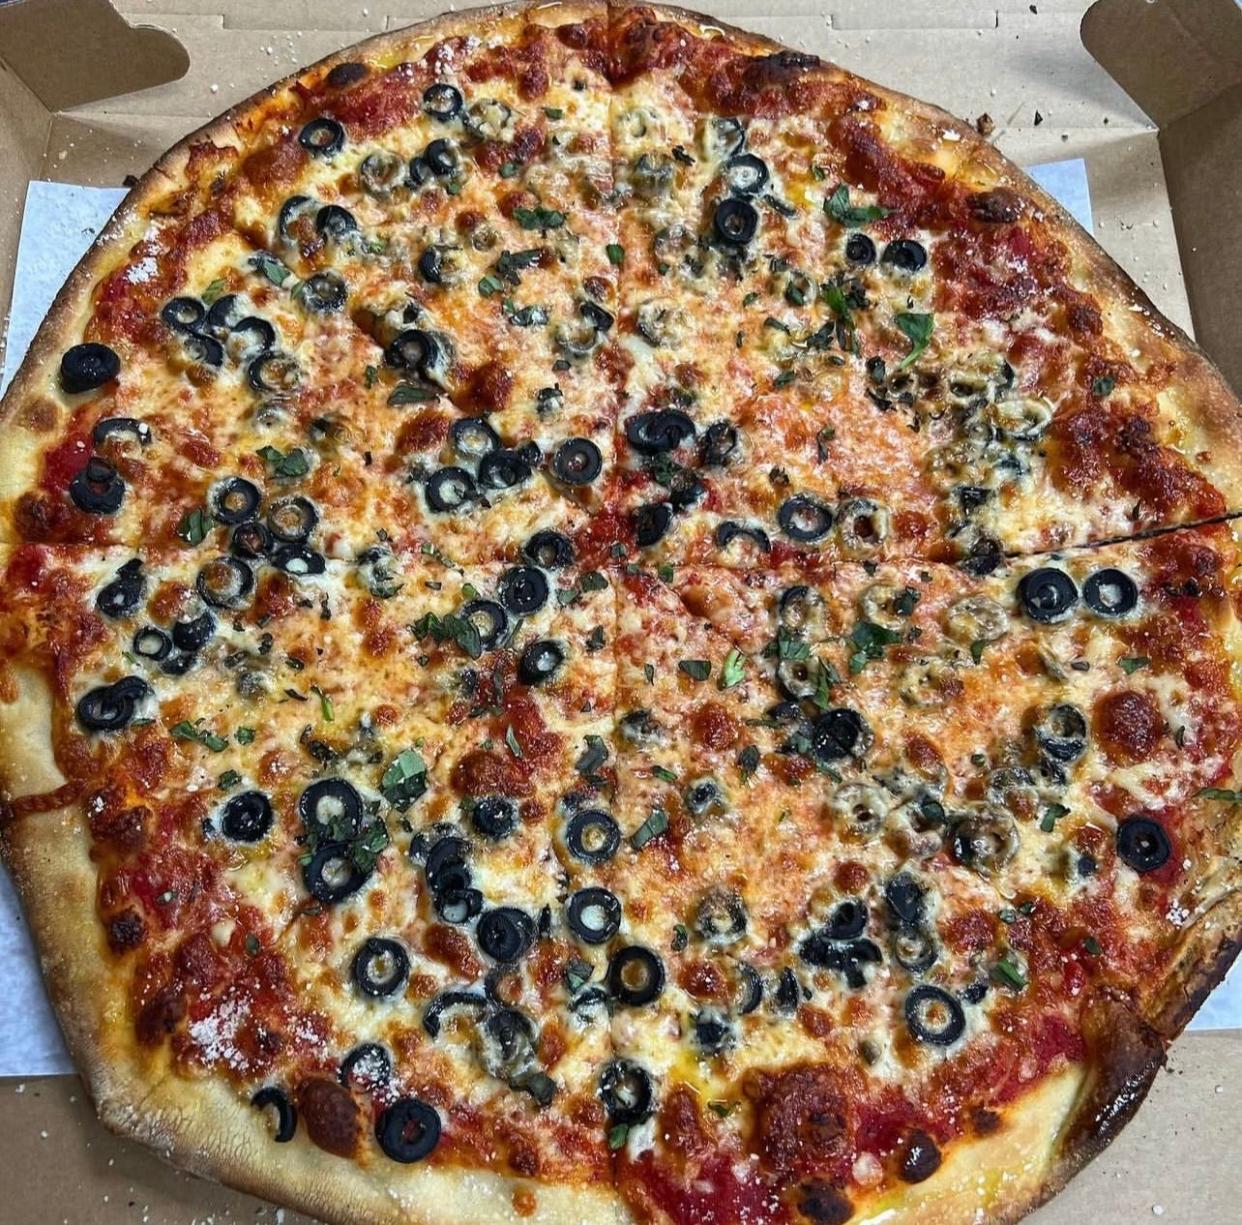 A black olive pie from Tramonto's Pizza in Ocean Township.